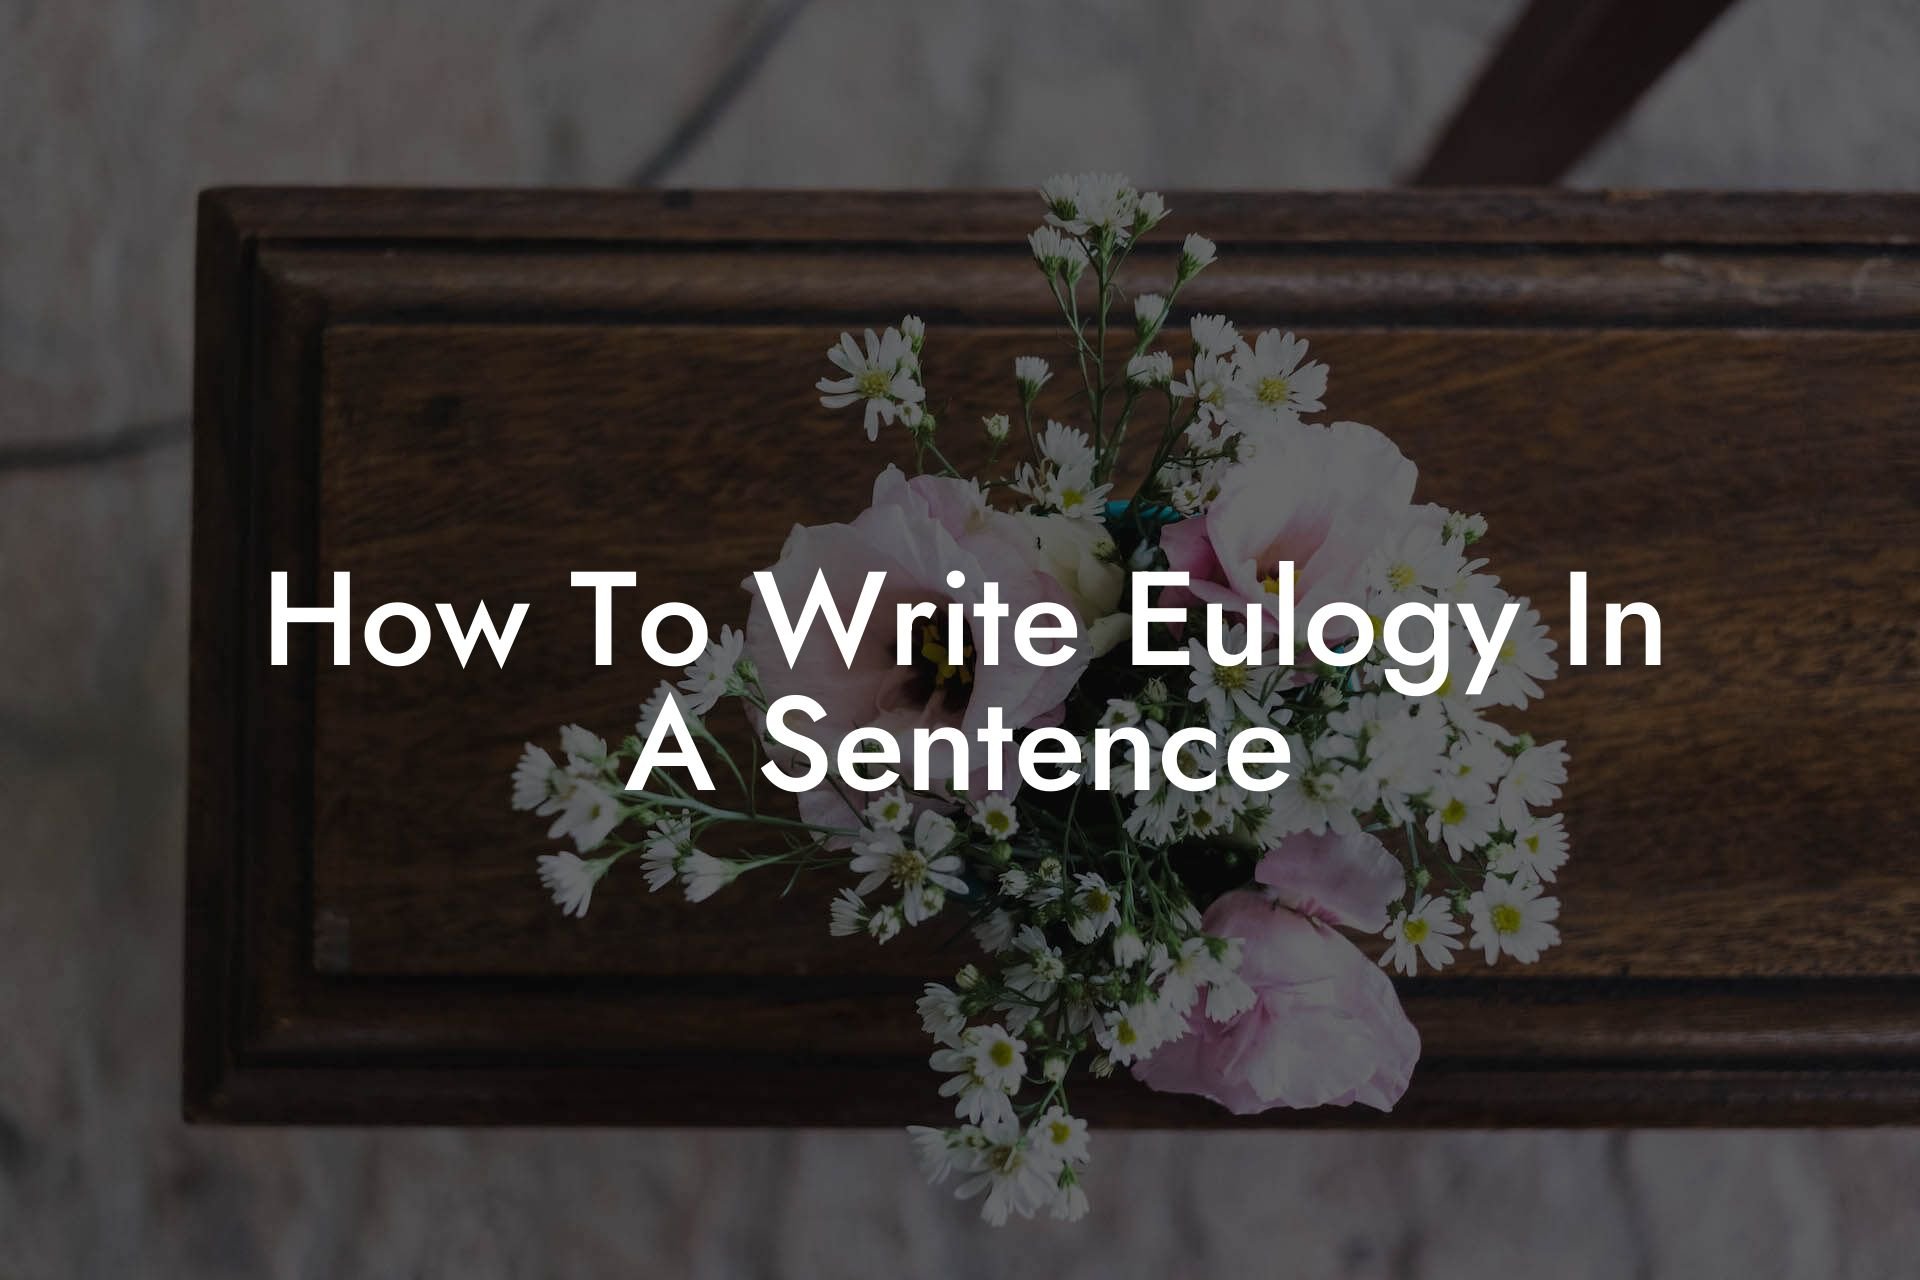 How To Write Eulogy In A Sentence